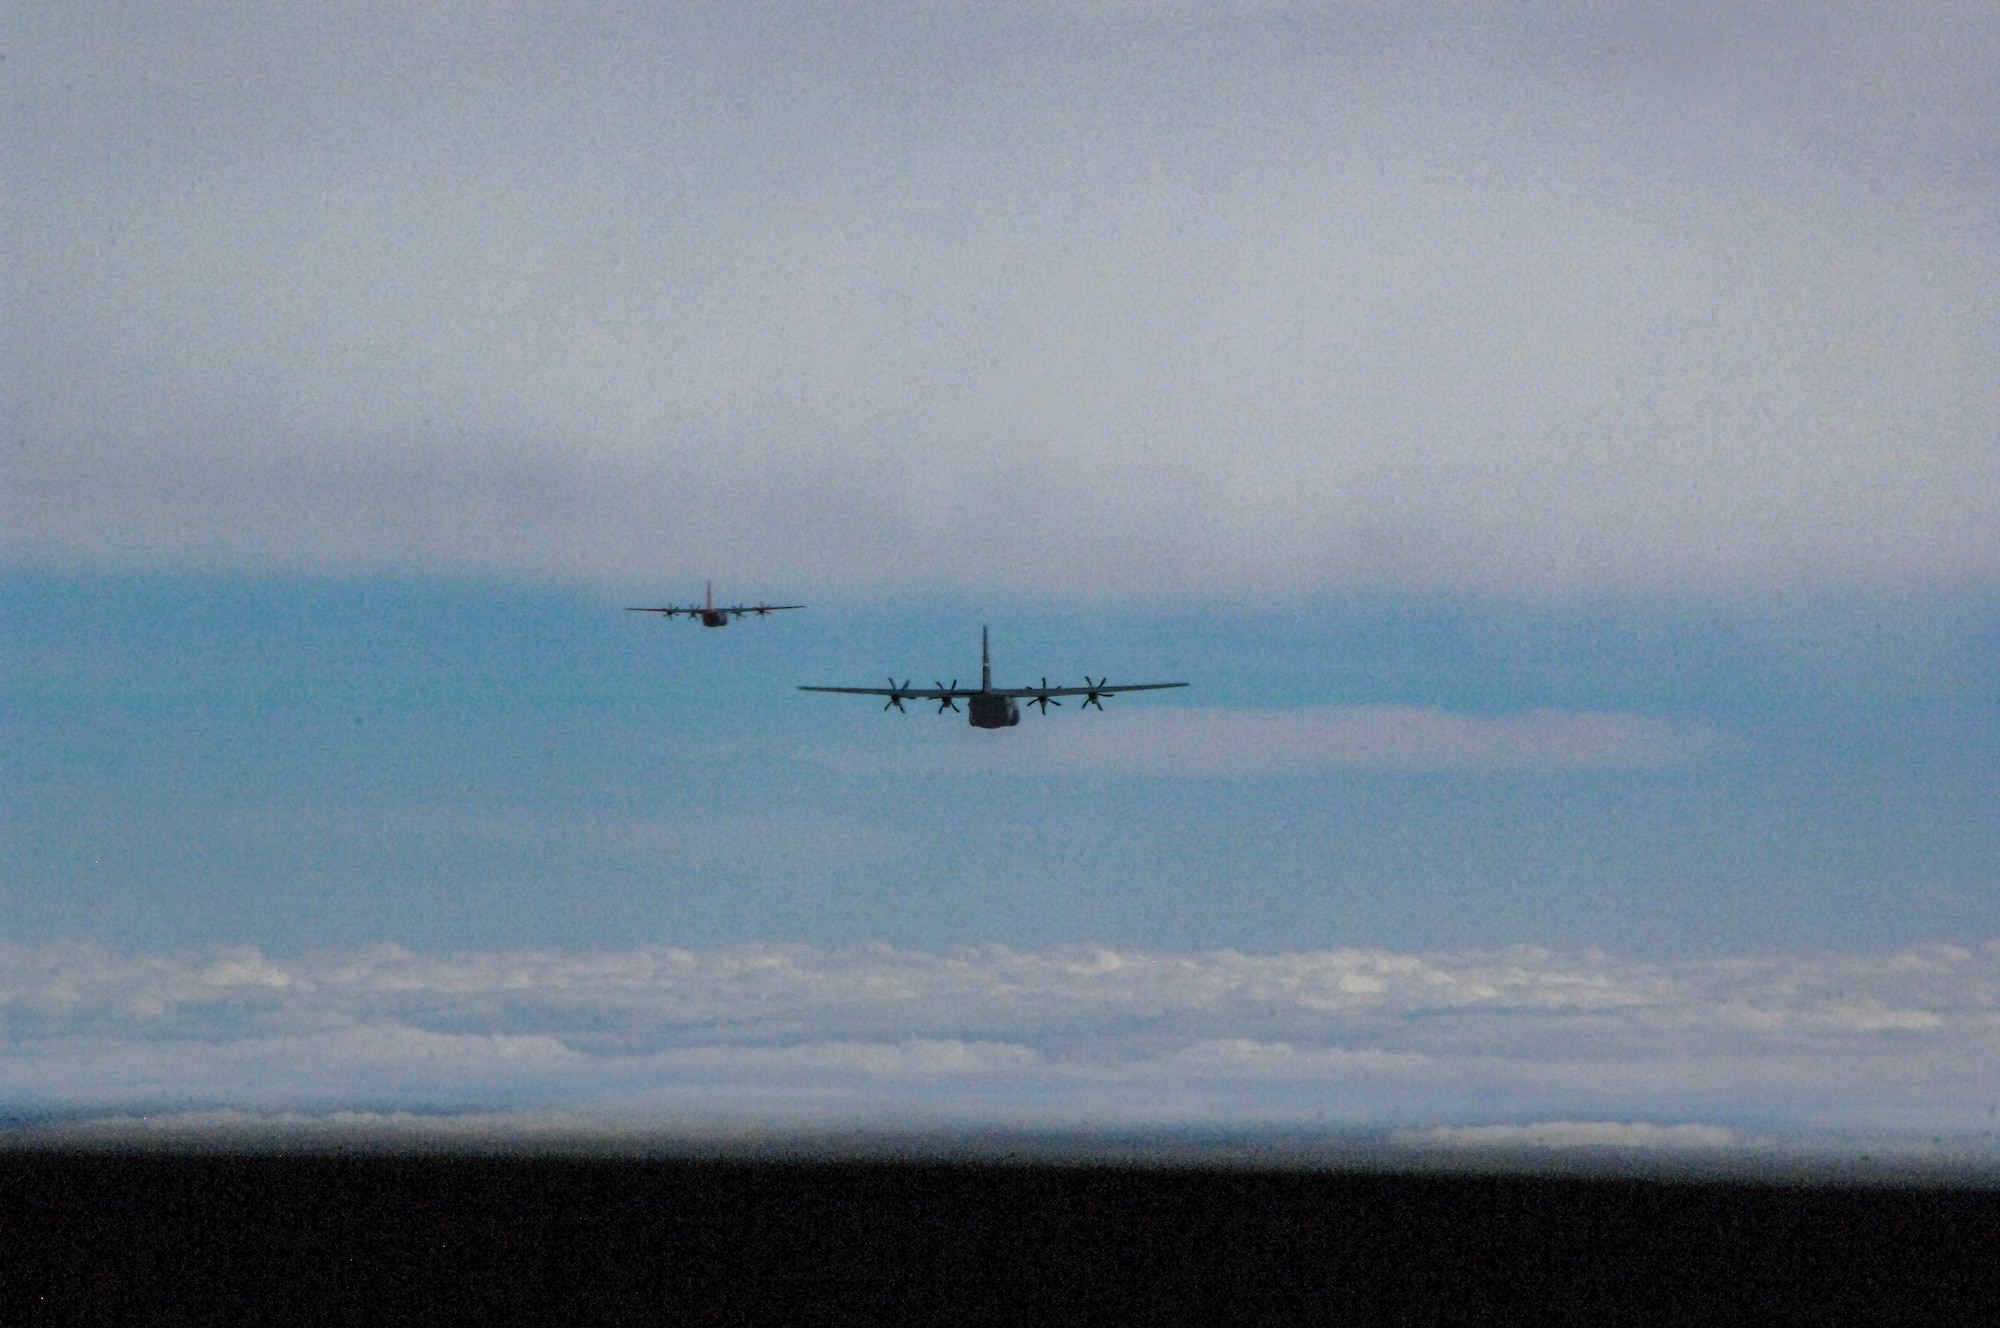 Two C-130s fly in formation